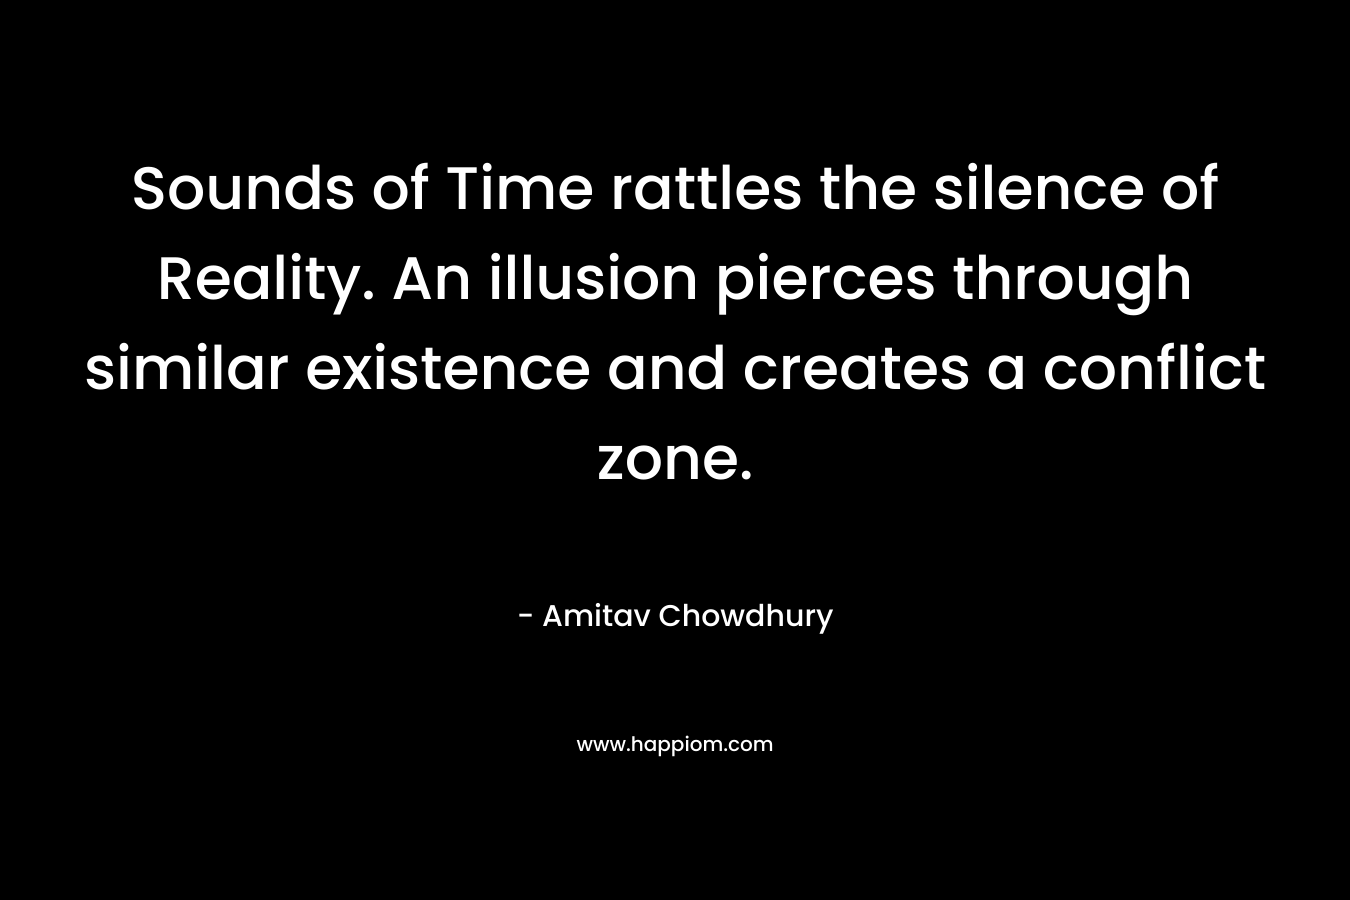 Sounds of Time rattles the silence of Reality. An illusion pierces through similar existence and creates a conflict zone. – Amitav Chowdhury